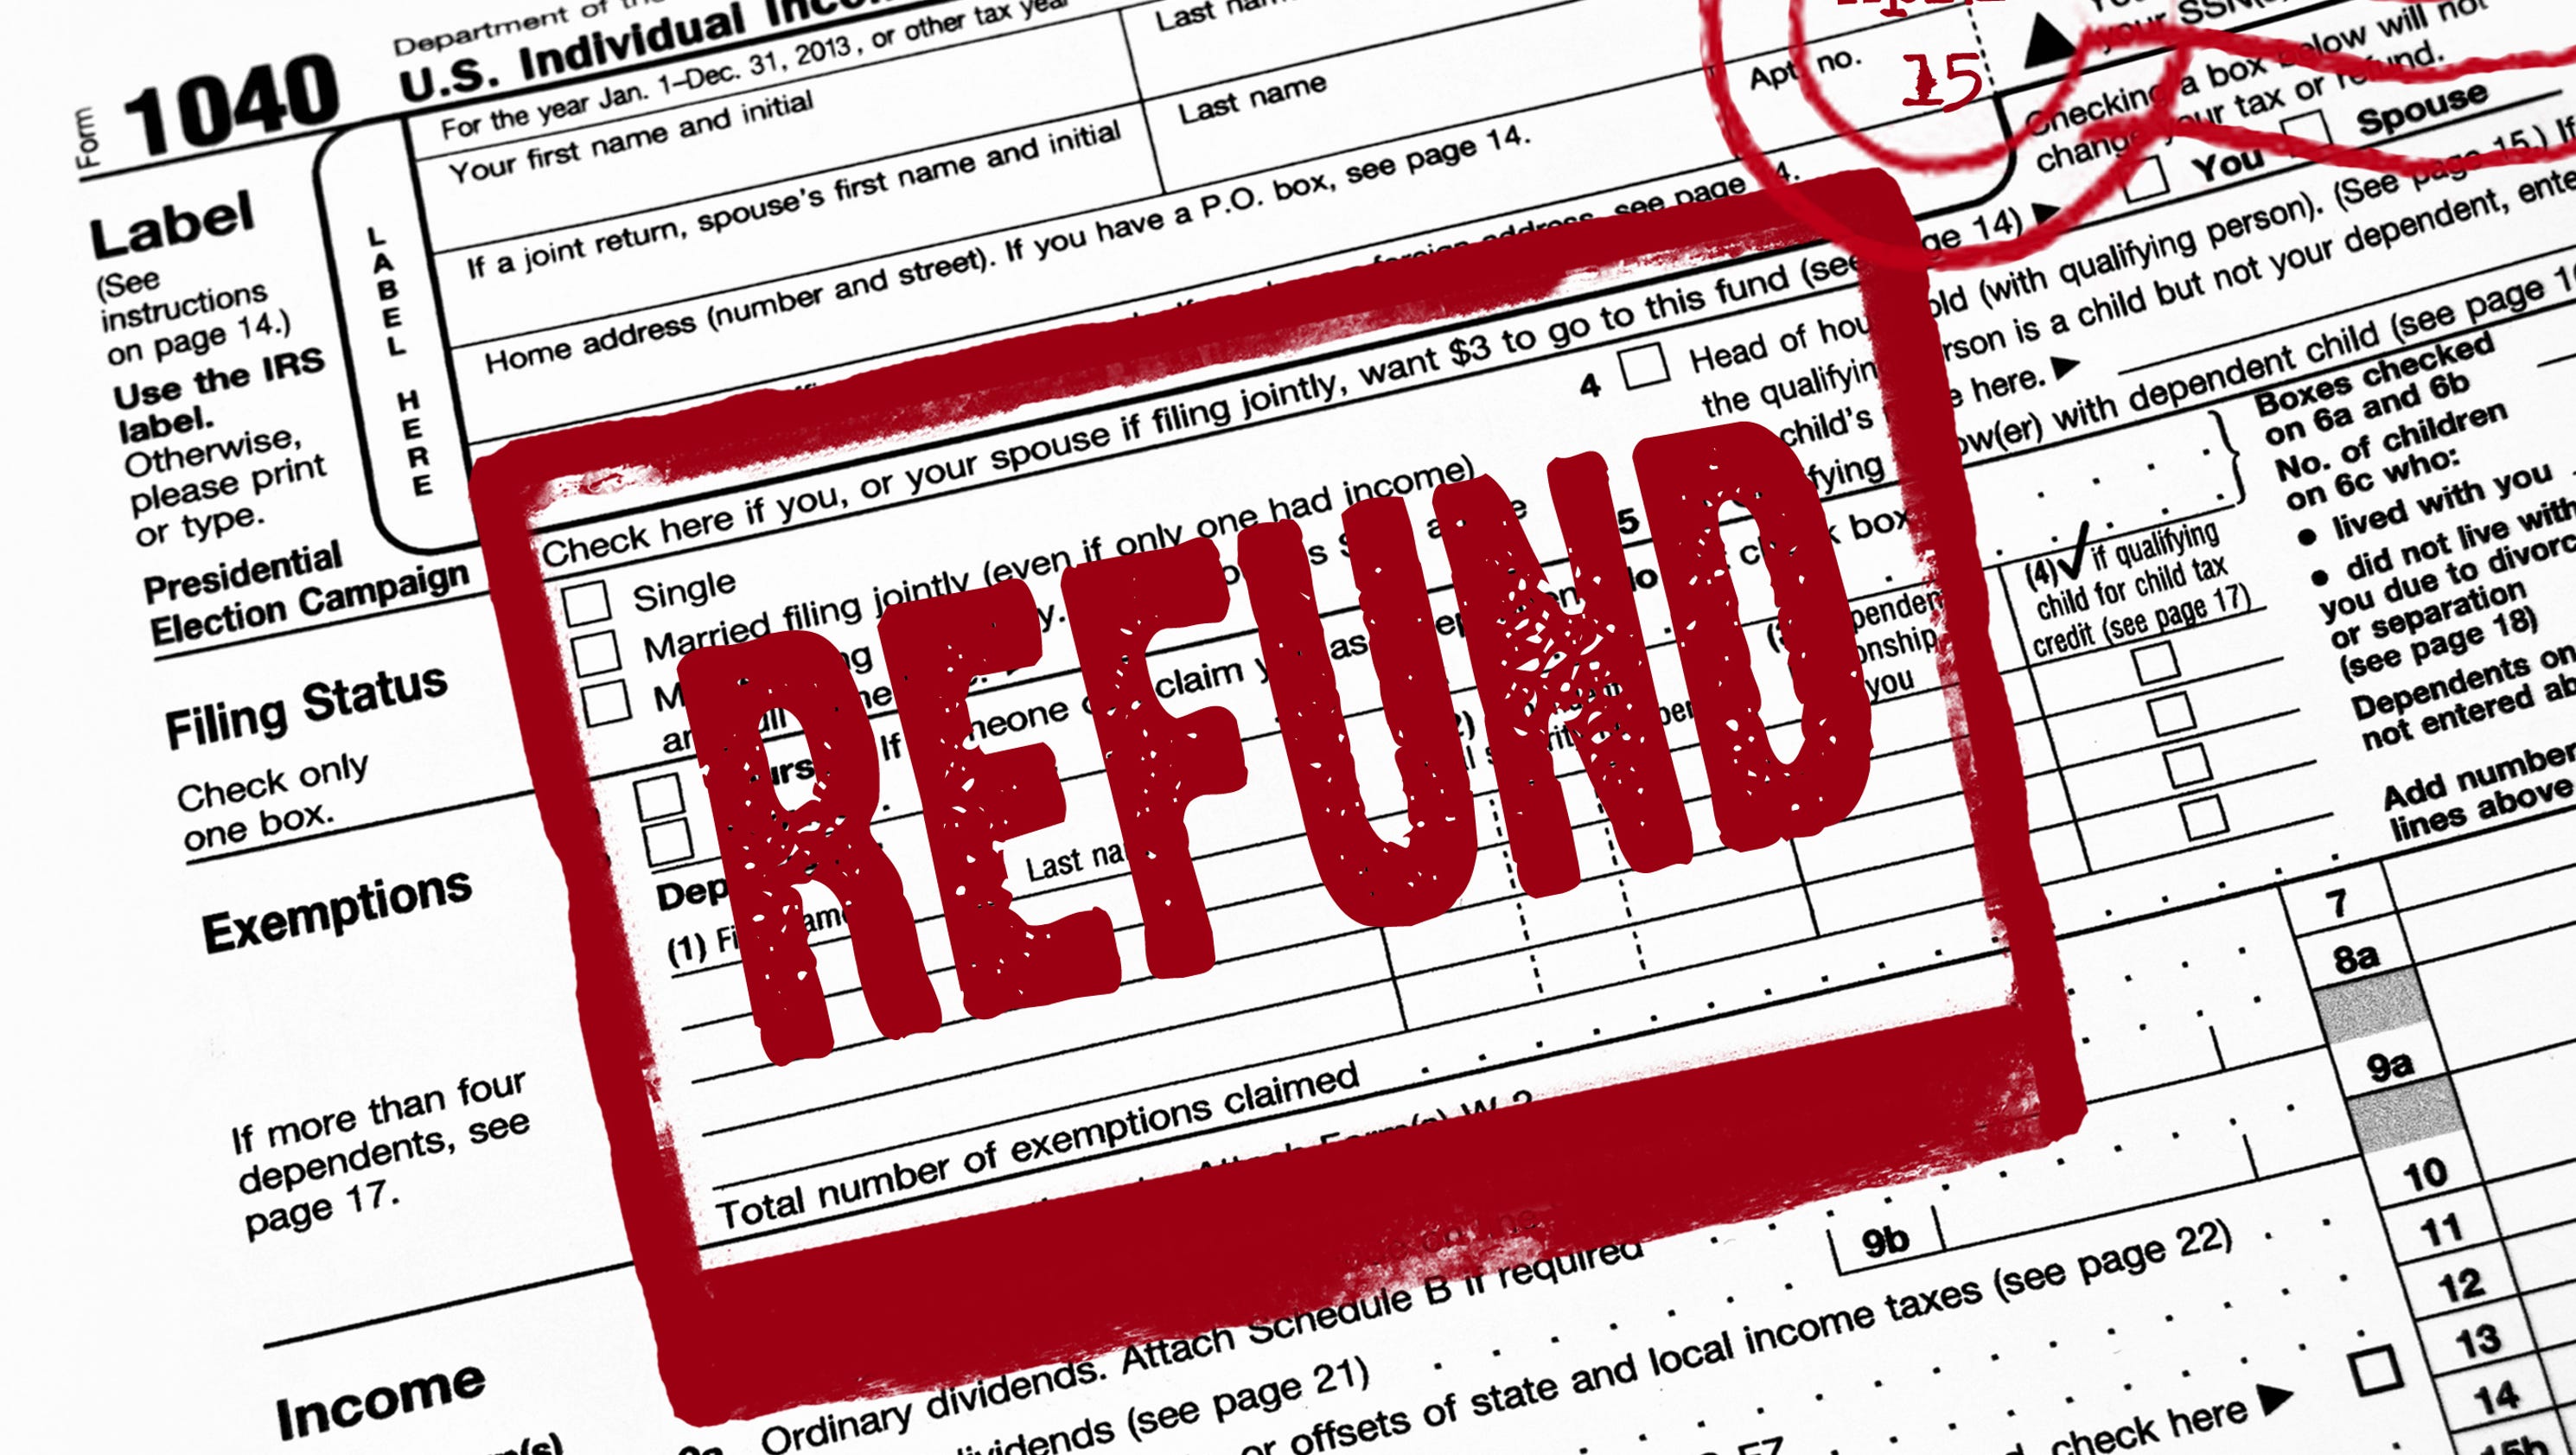 where-s-my-refund-up-as-well-as-all-irs-systems-refund-schedule-2022